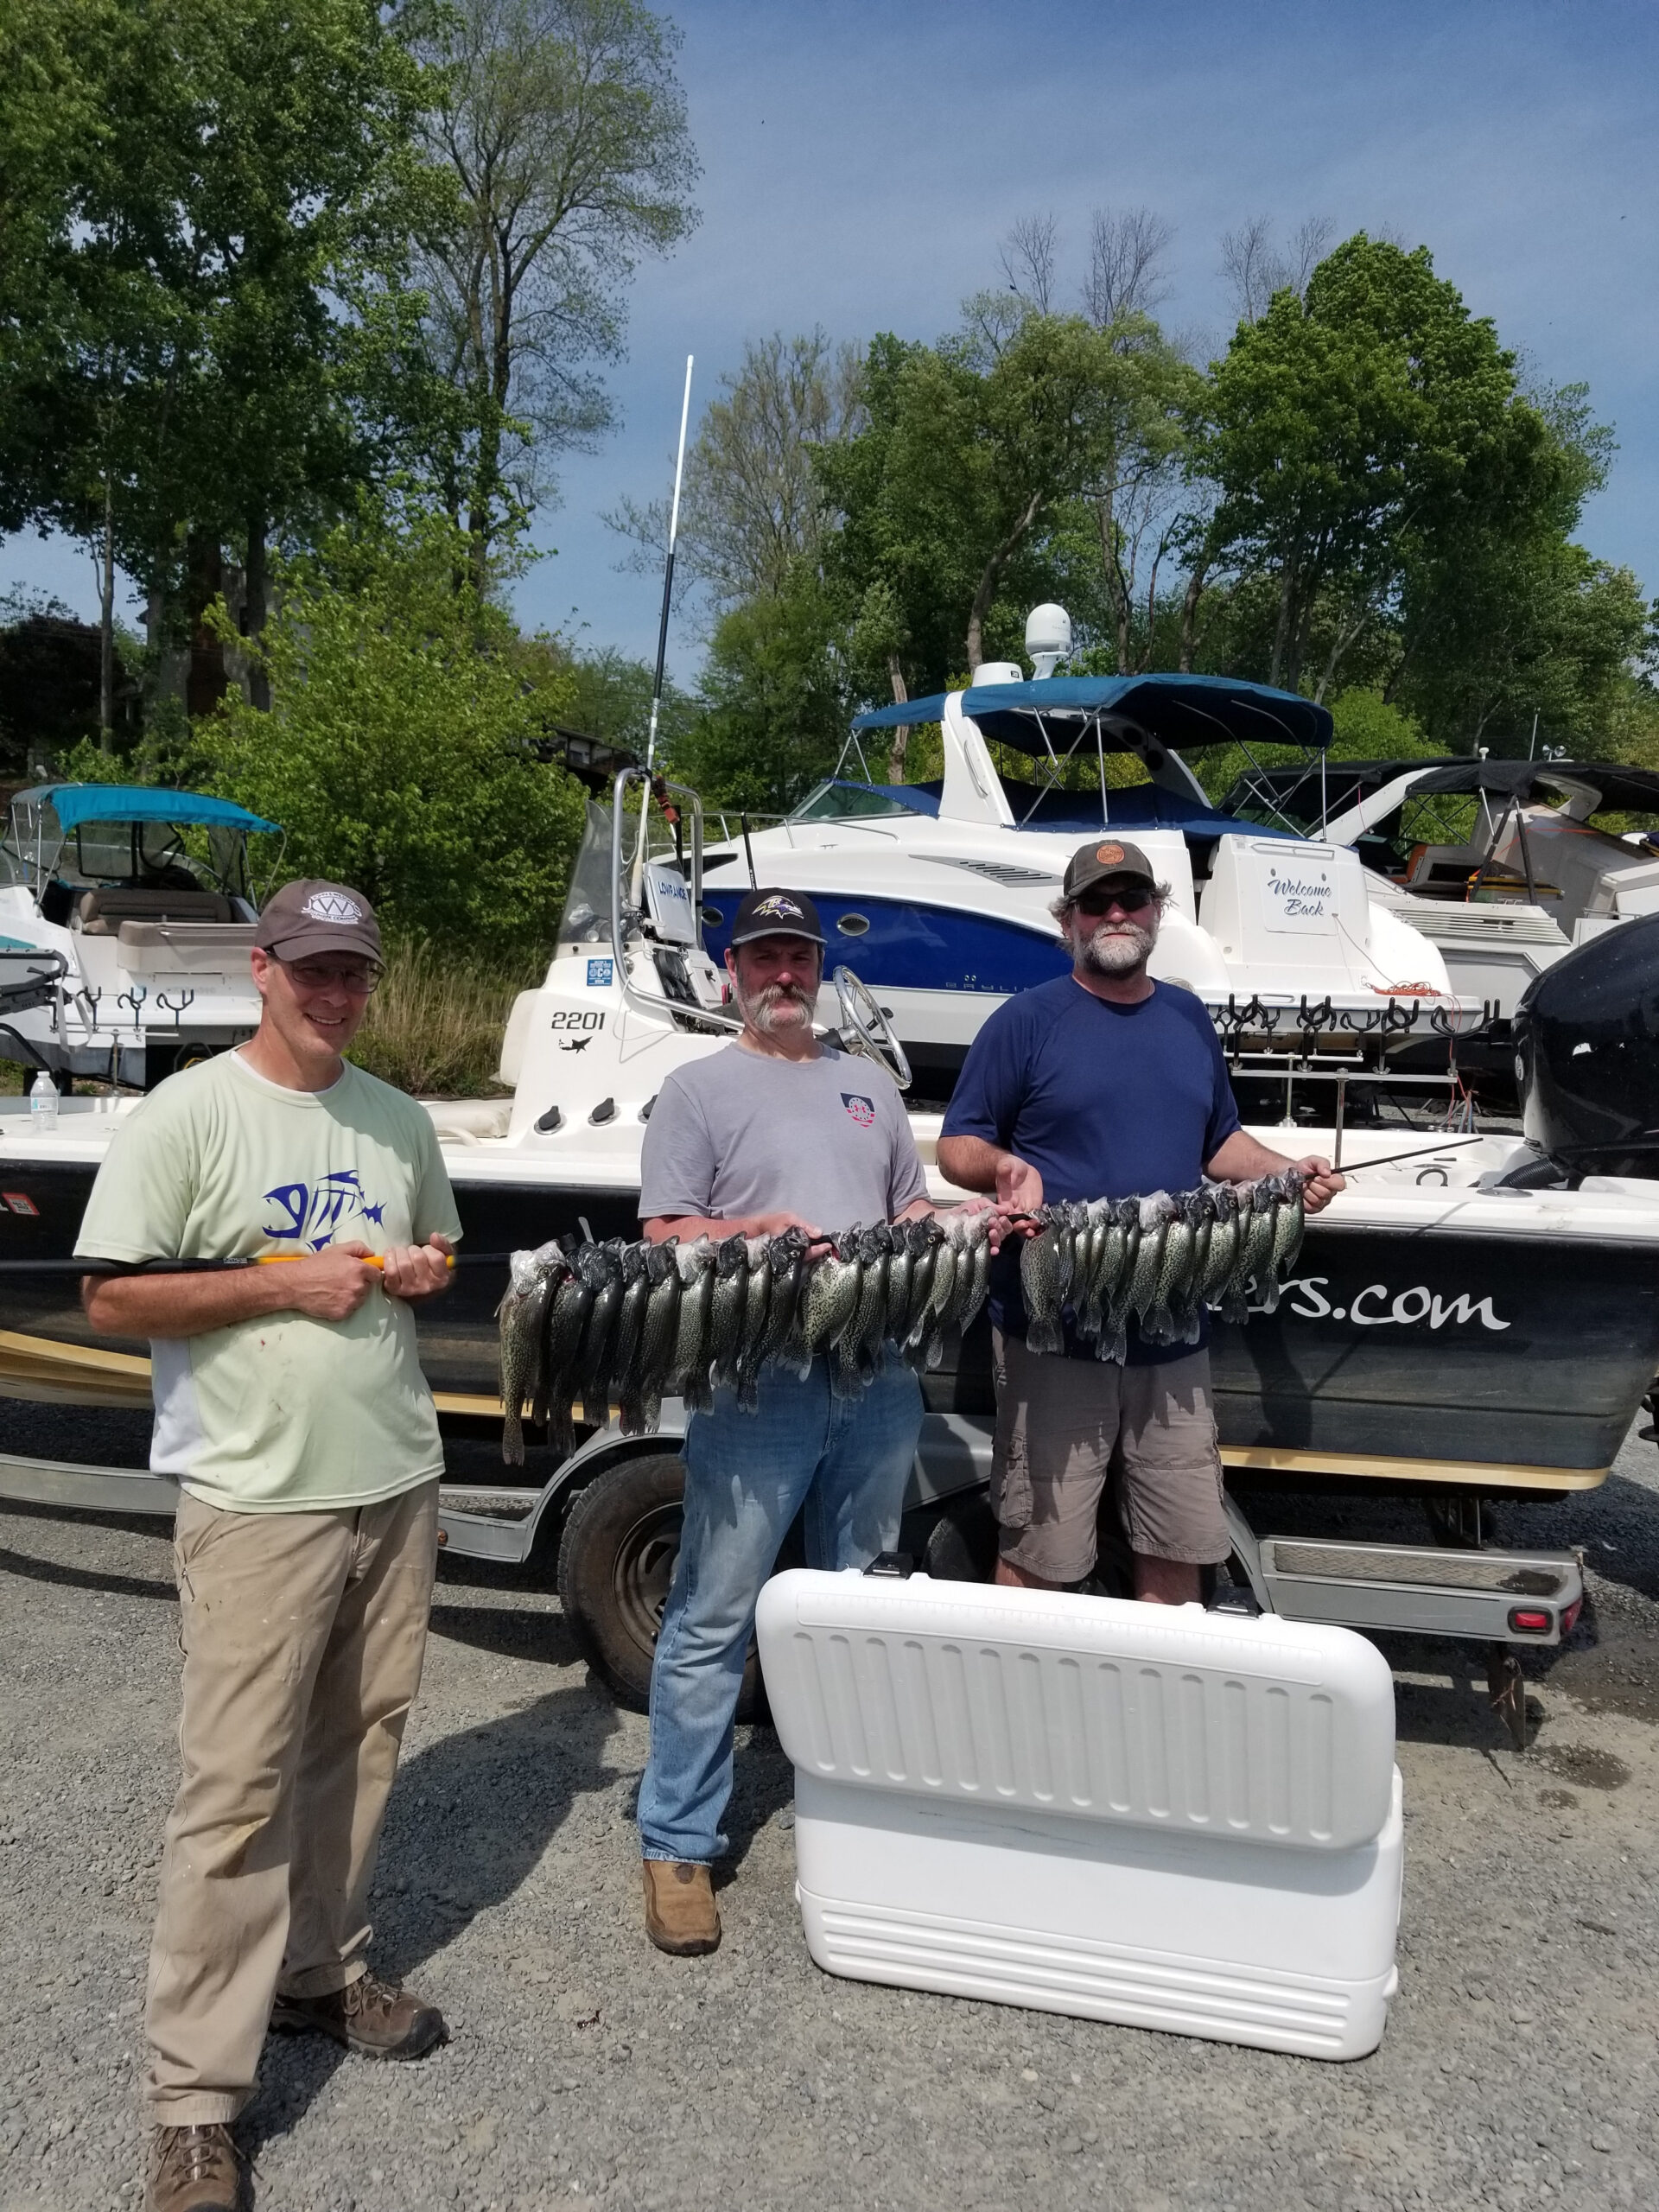 https://indianheadcharters.com/wp-content/uploads/2021/05/4-28-21-scaled.jpg